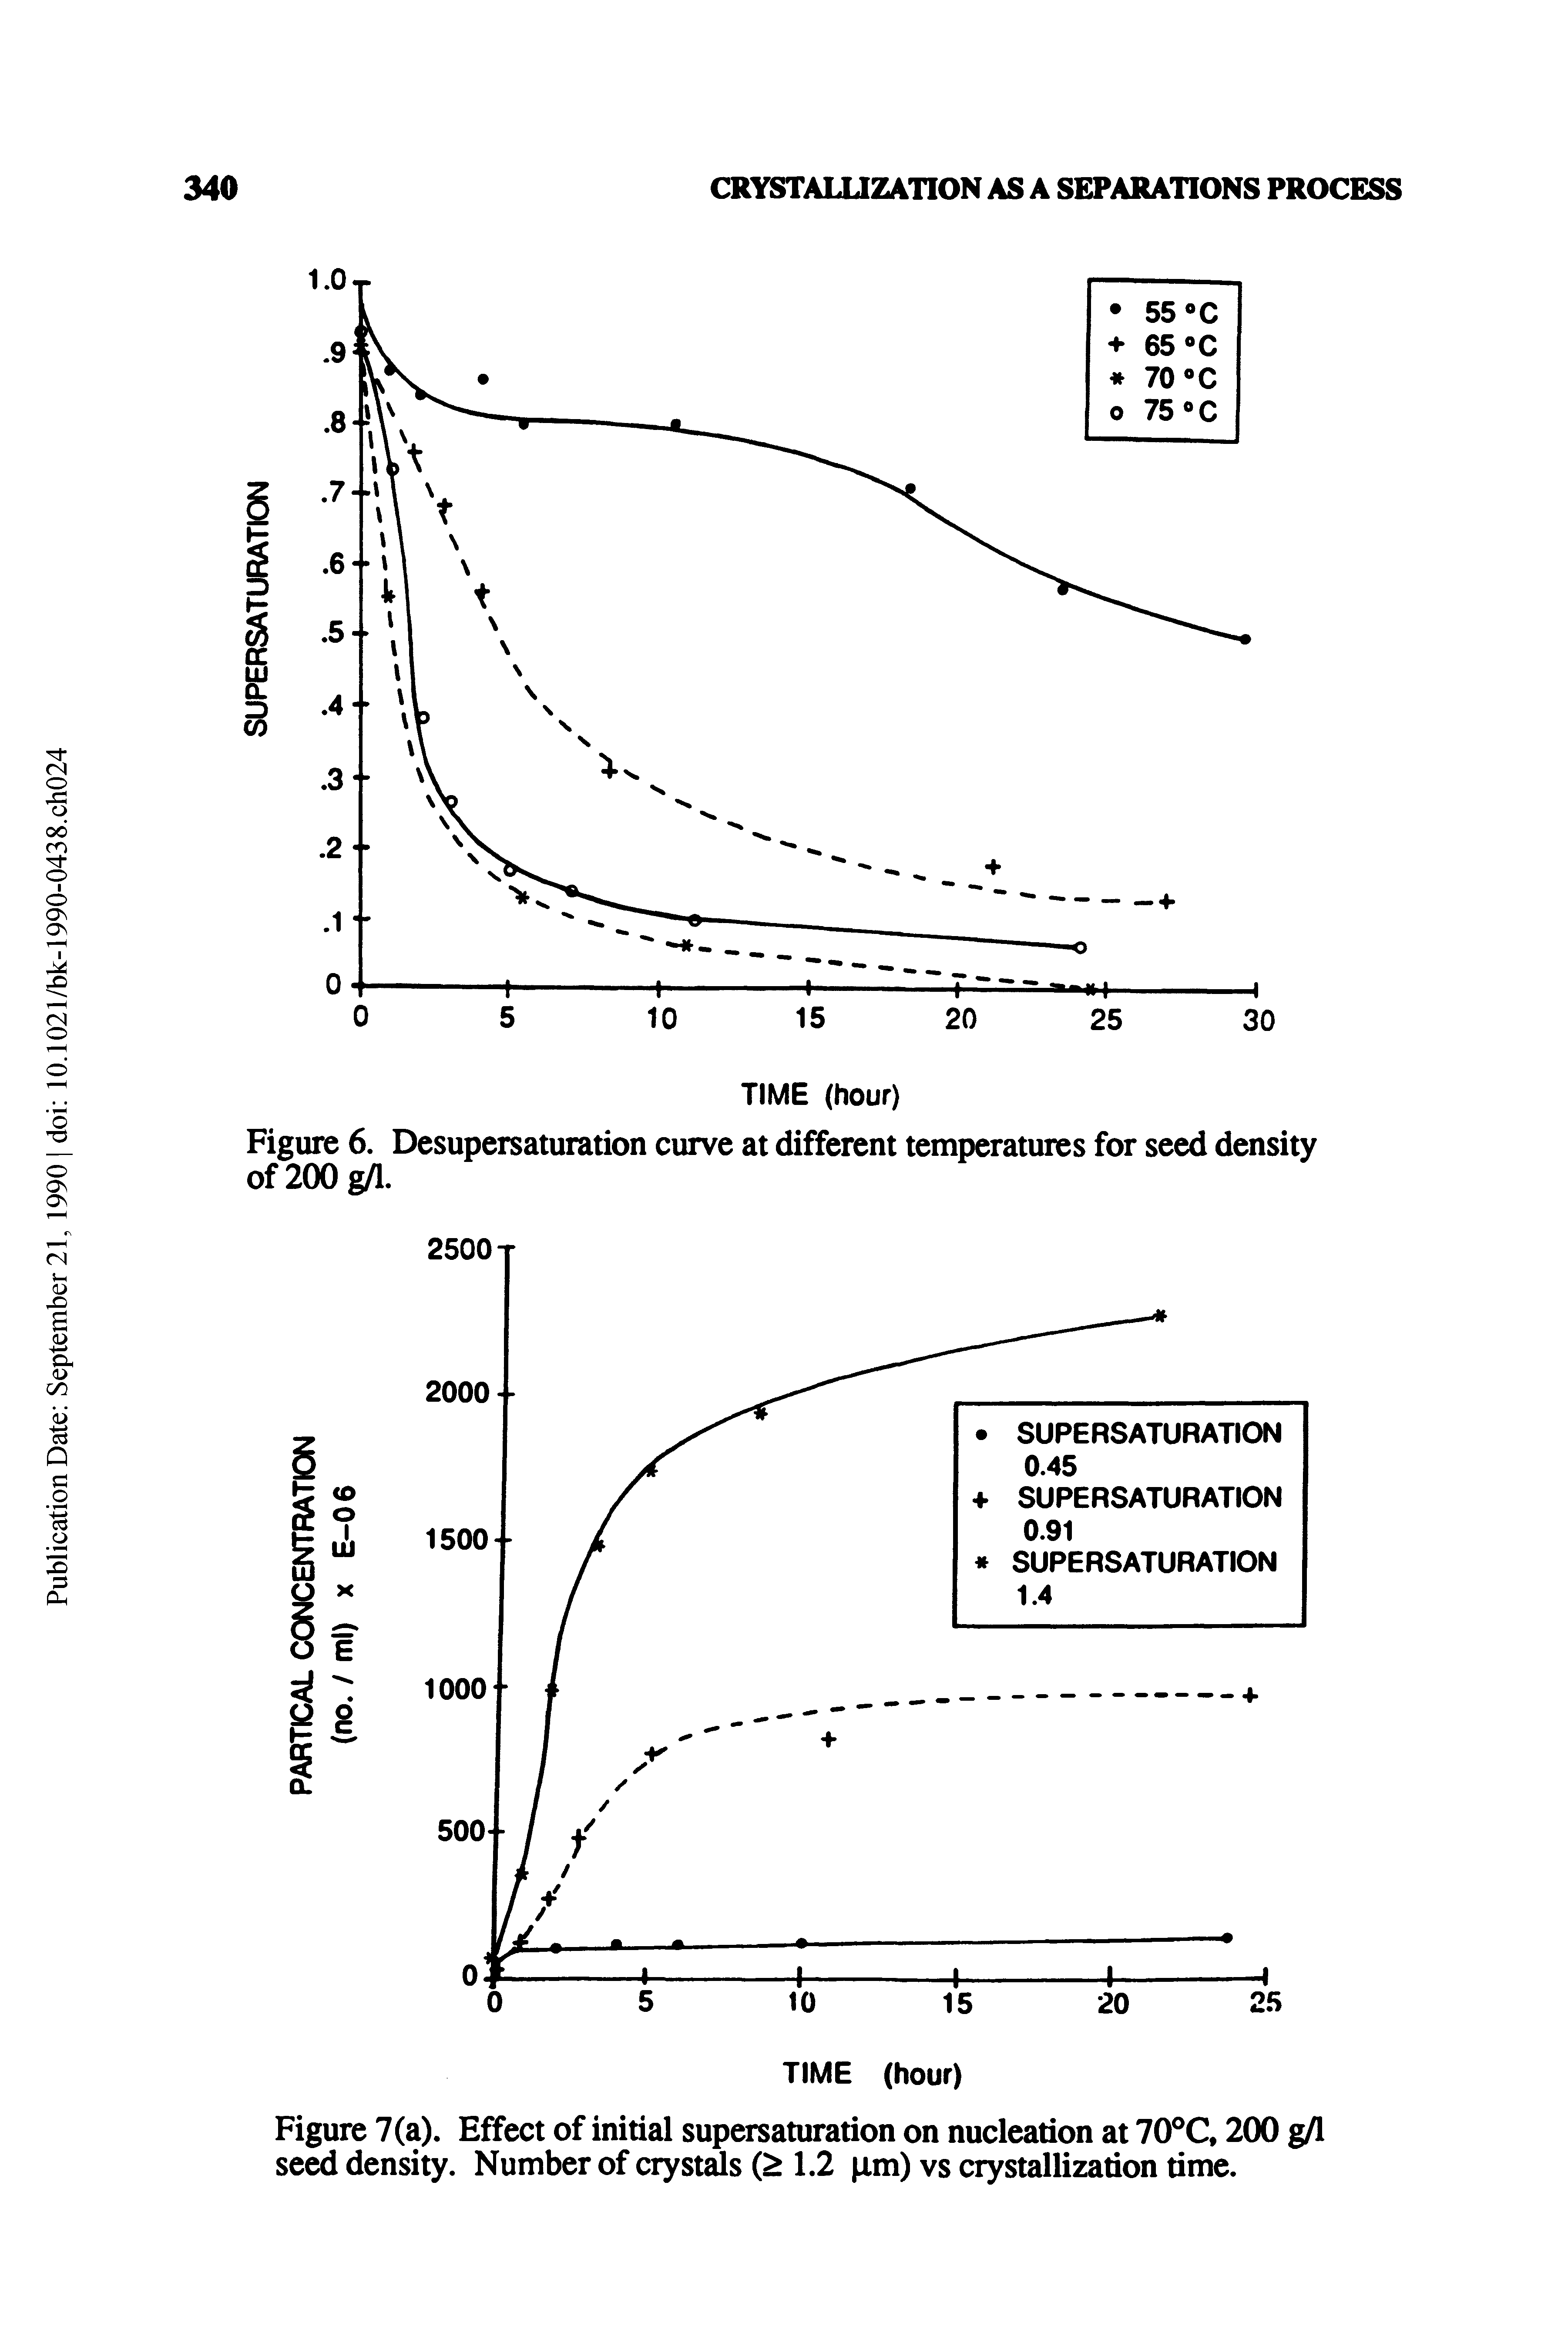 Figure 6. Desupersaturation curve at different temperatures for seed density of200g/l.